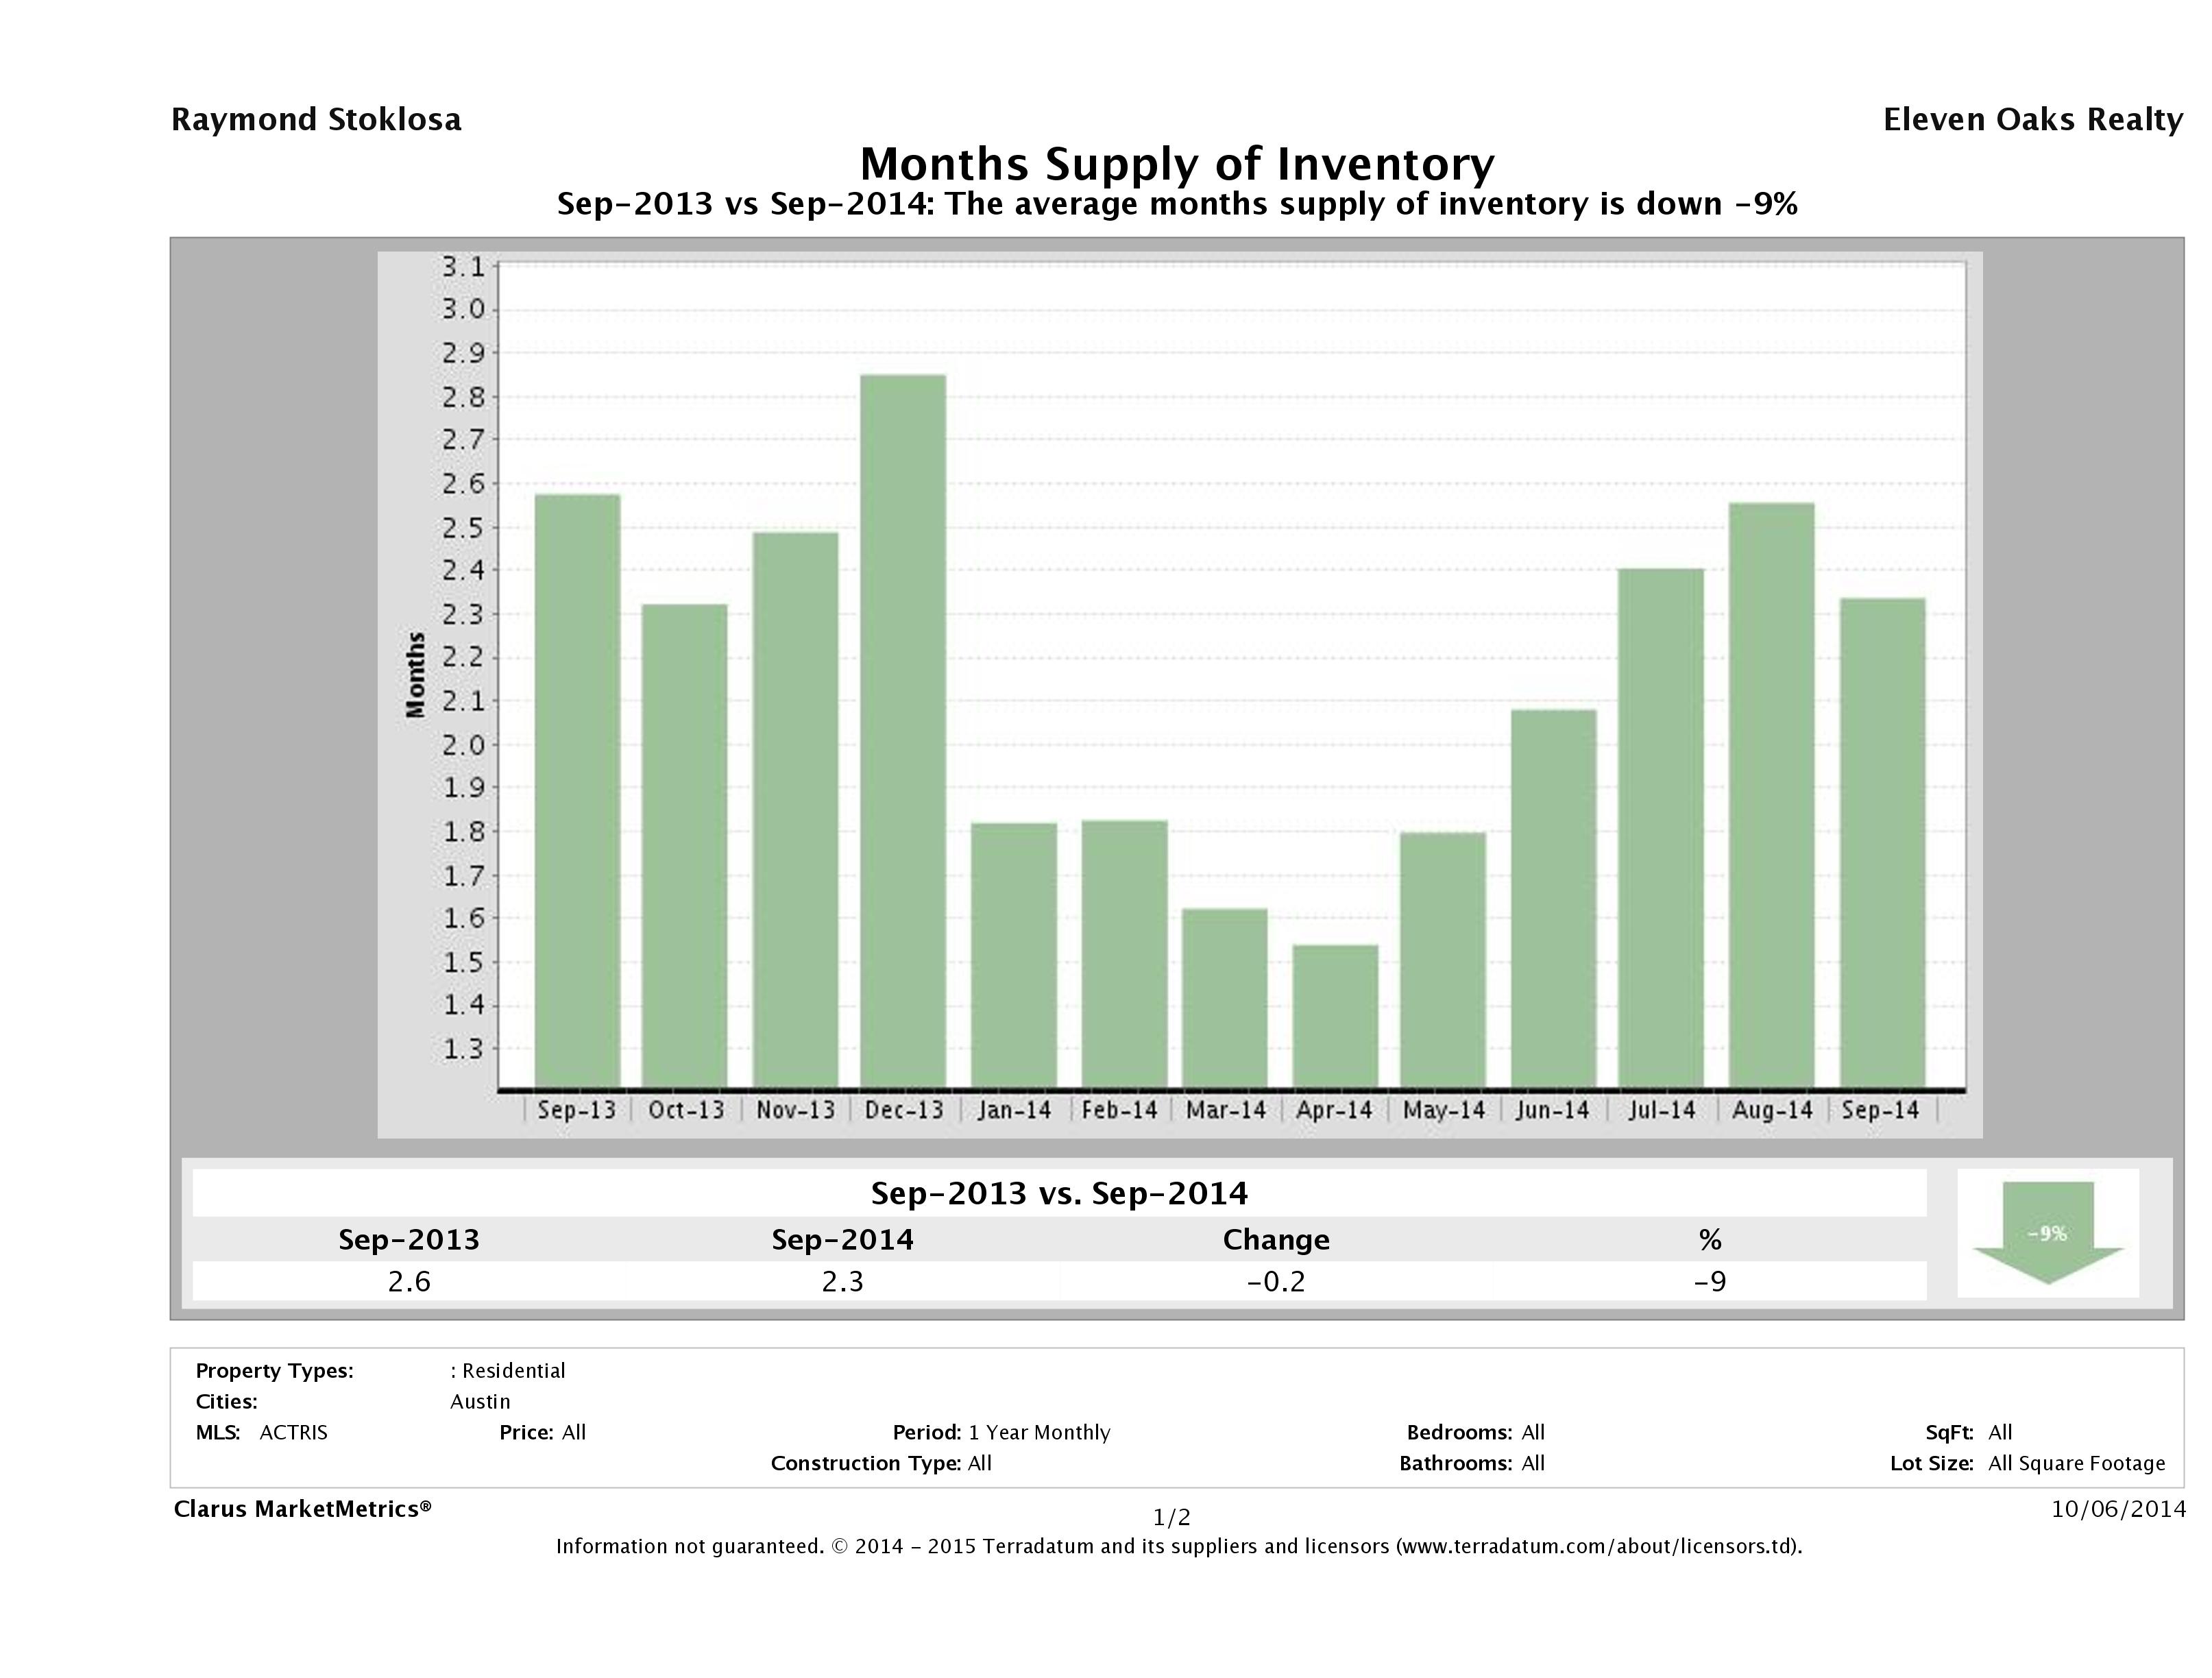 Austin single family home months inventory September 2014